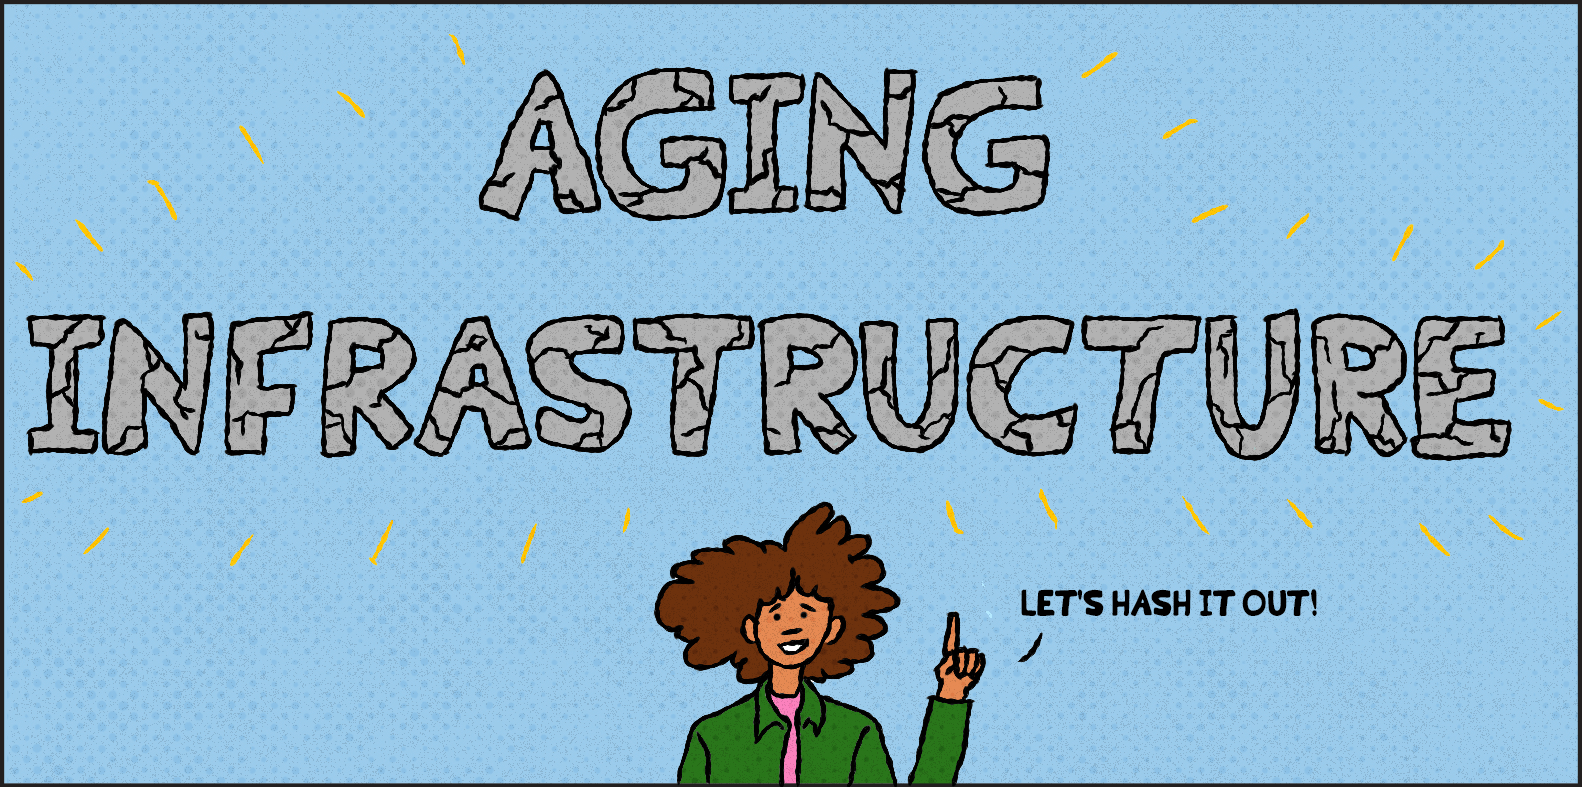 Aging Infrastructure title